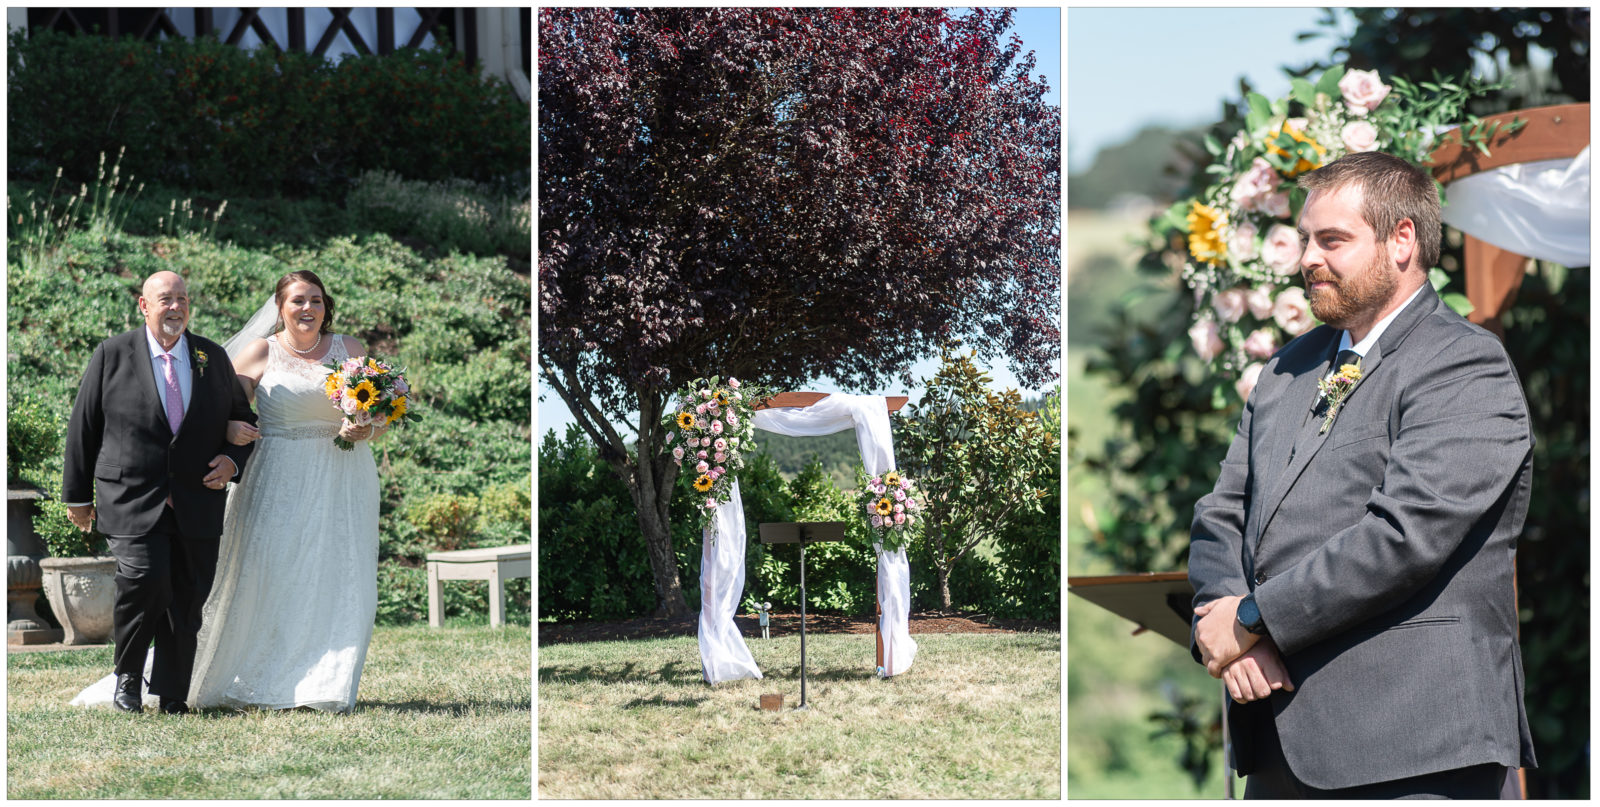 Ceremony details and first kiss for Classic Summer Vineyard Wedding at Zenith Vineyards in Salem, Oregon